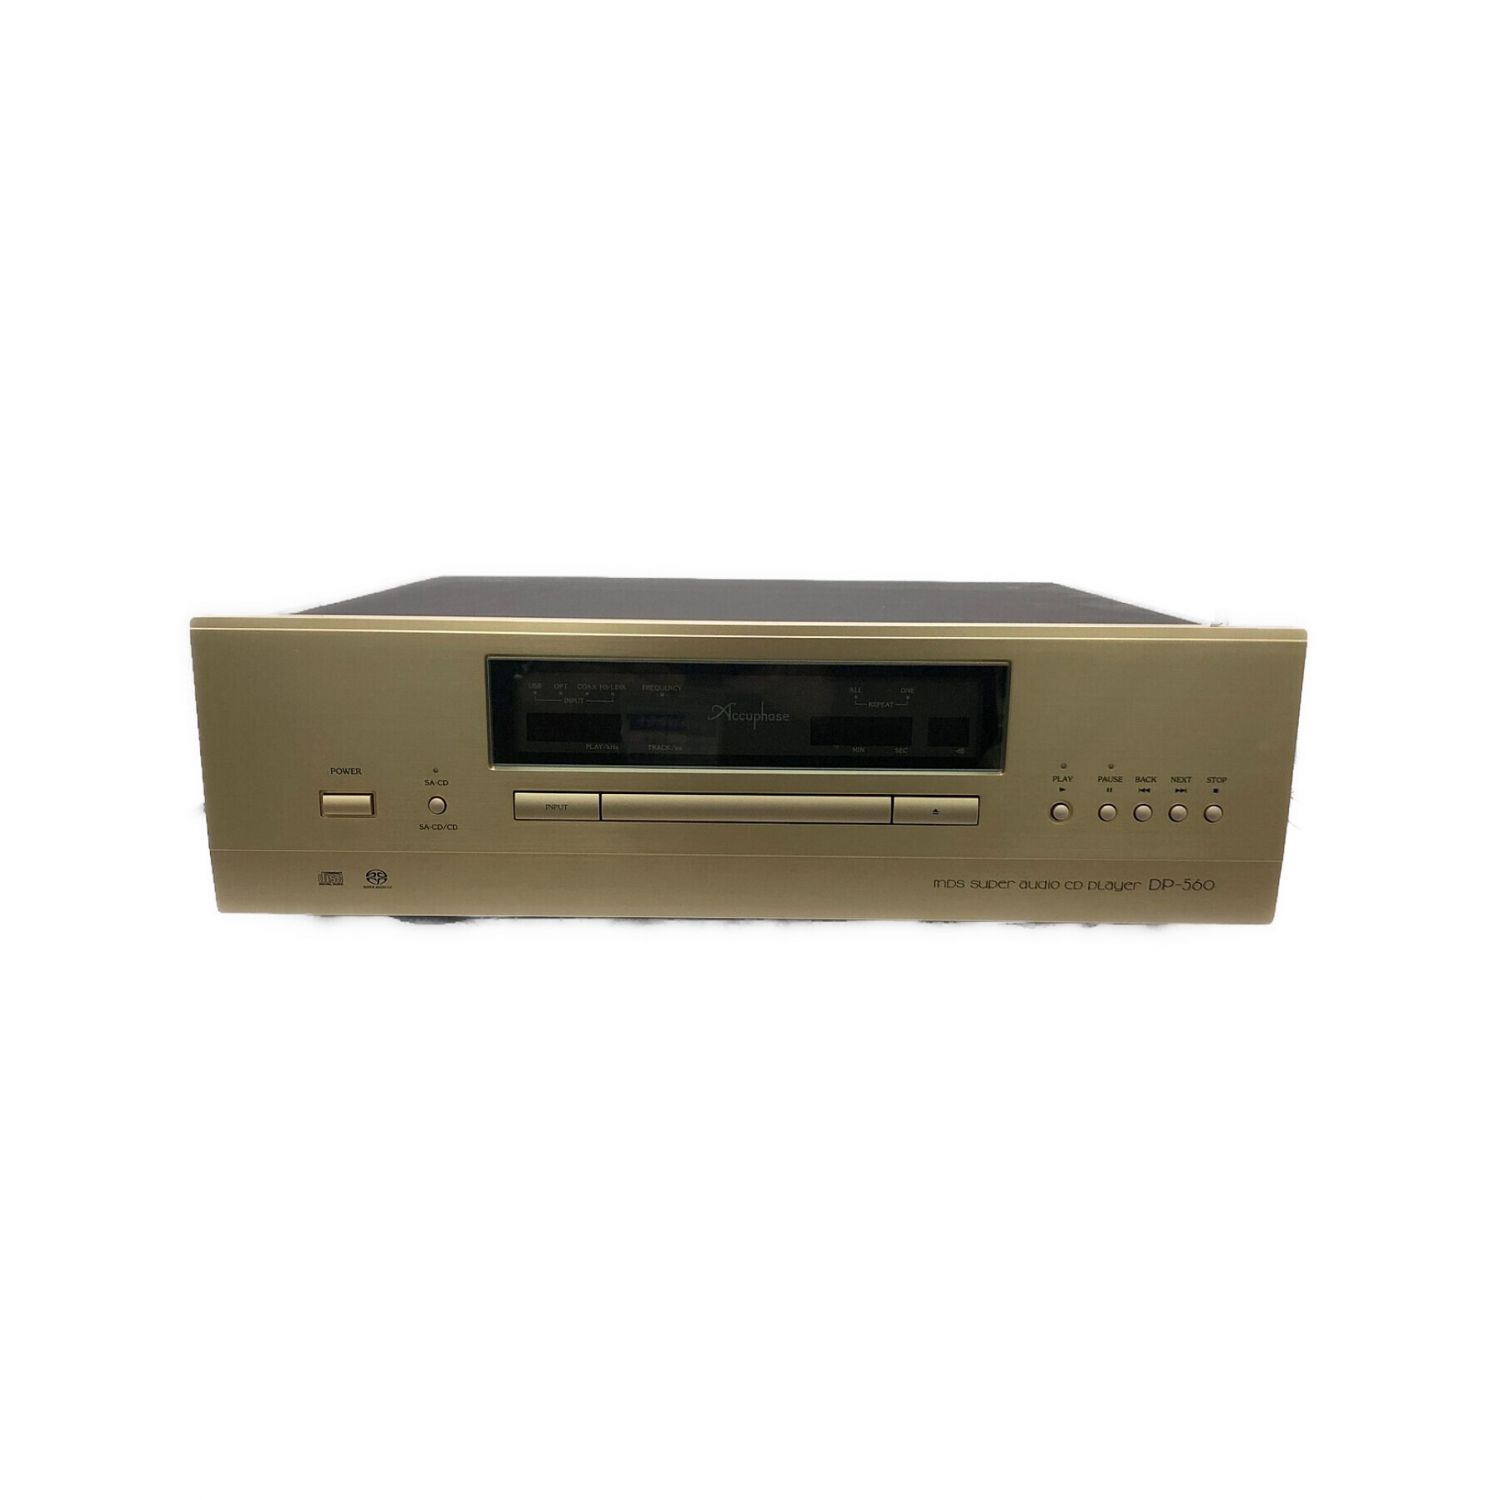 Accuphase (アキュフェーズ) SACDプレーヤー DP-560 動作確認済み